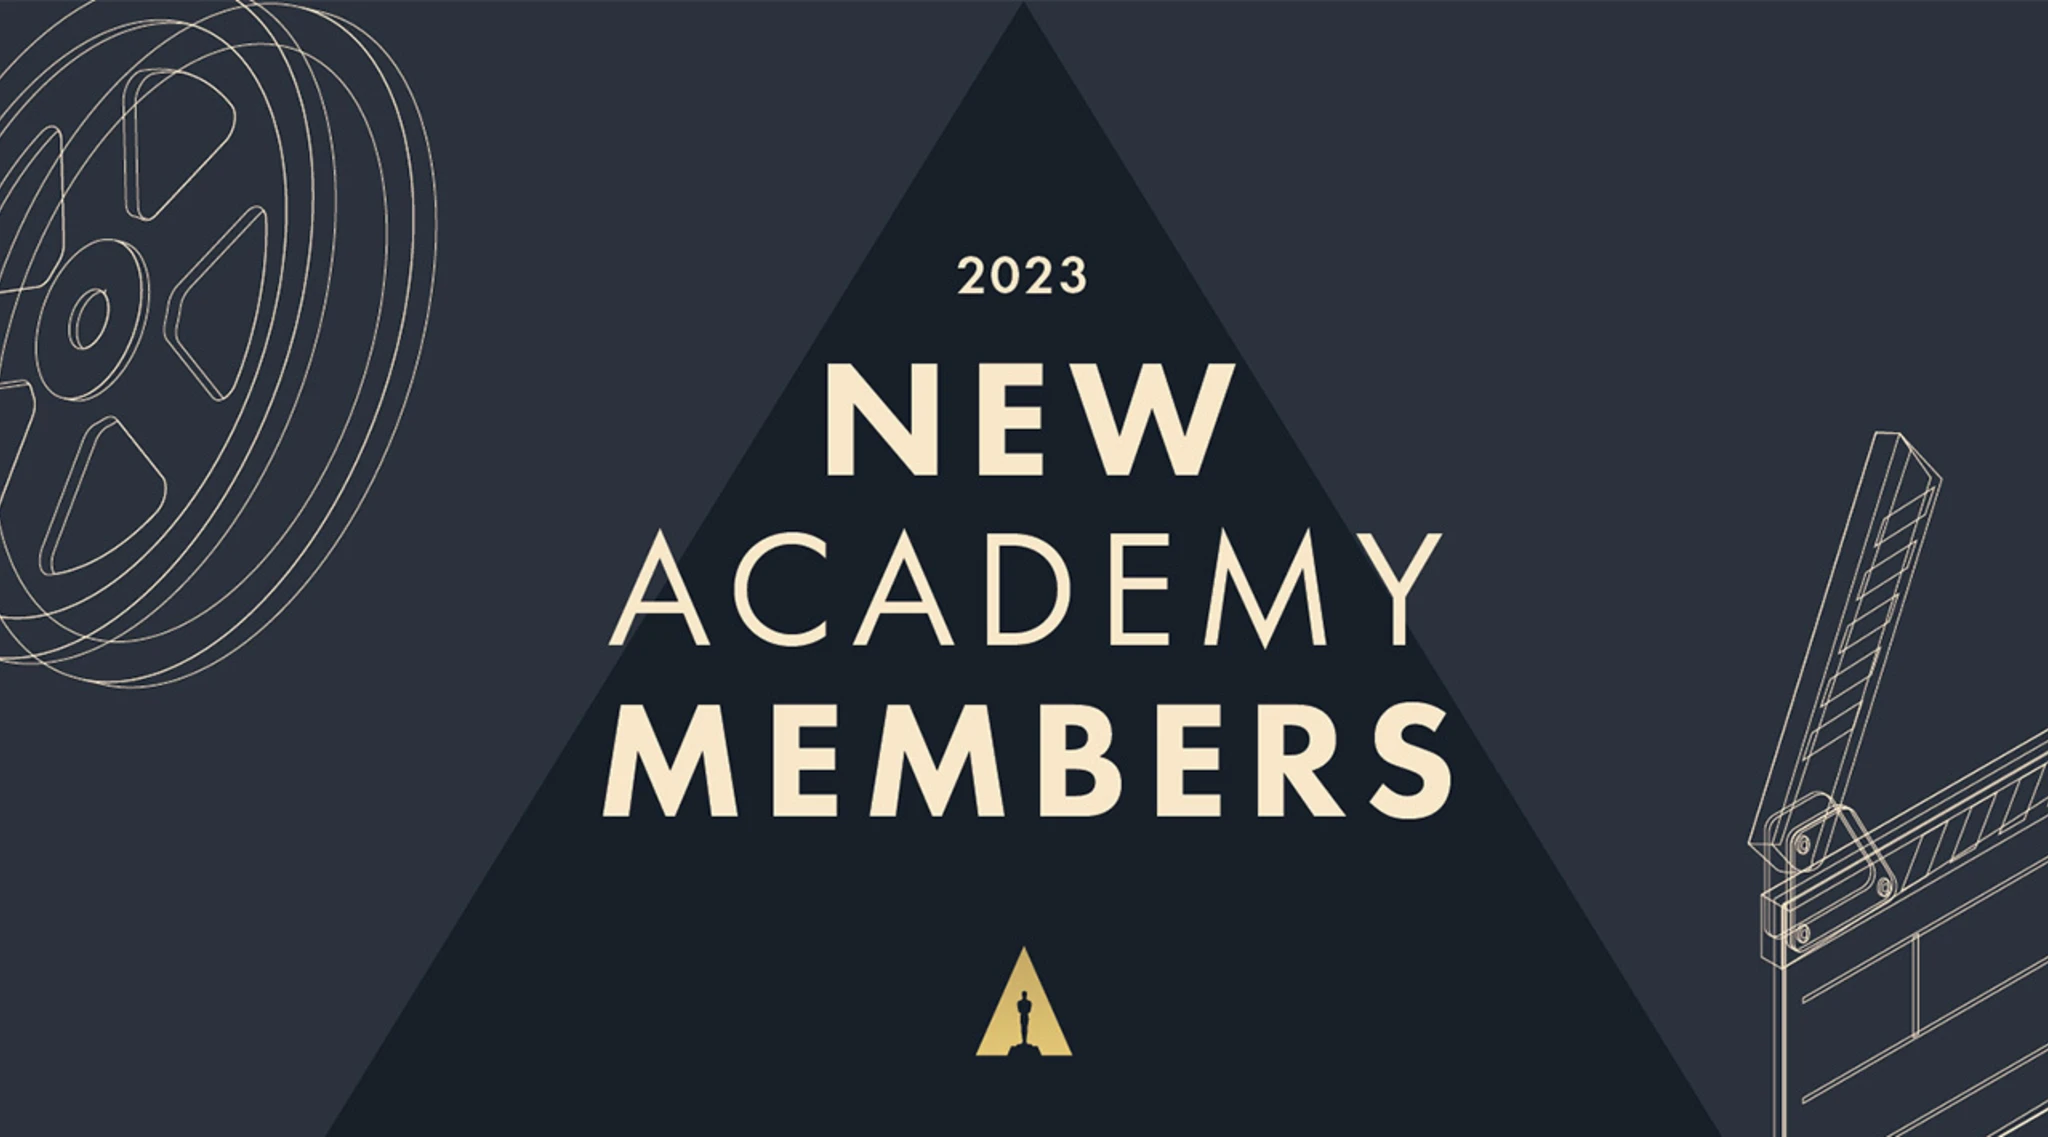 The Academy Invites 398 New Members for 2023: See the Full List